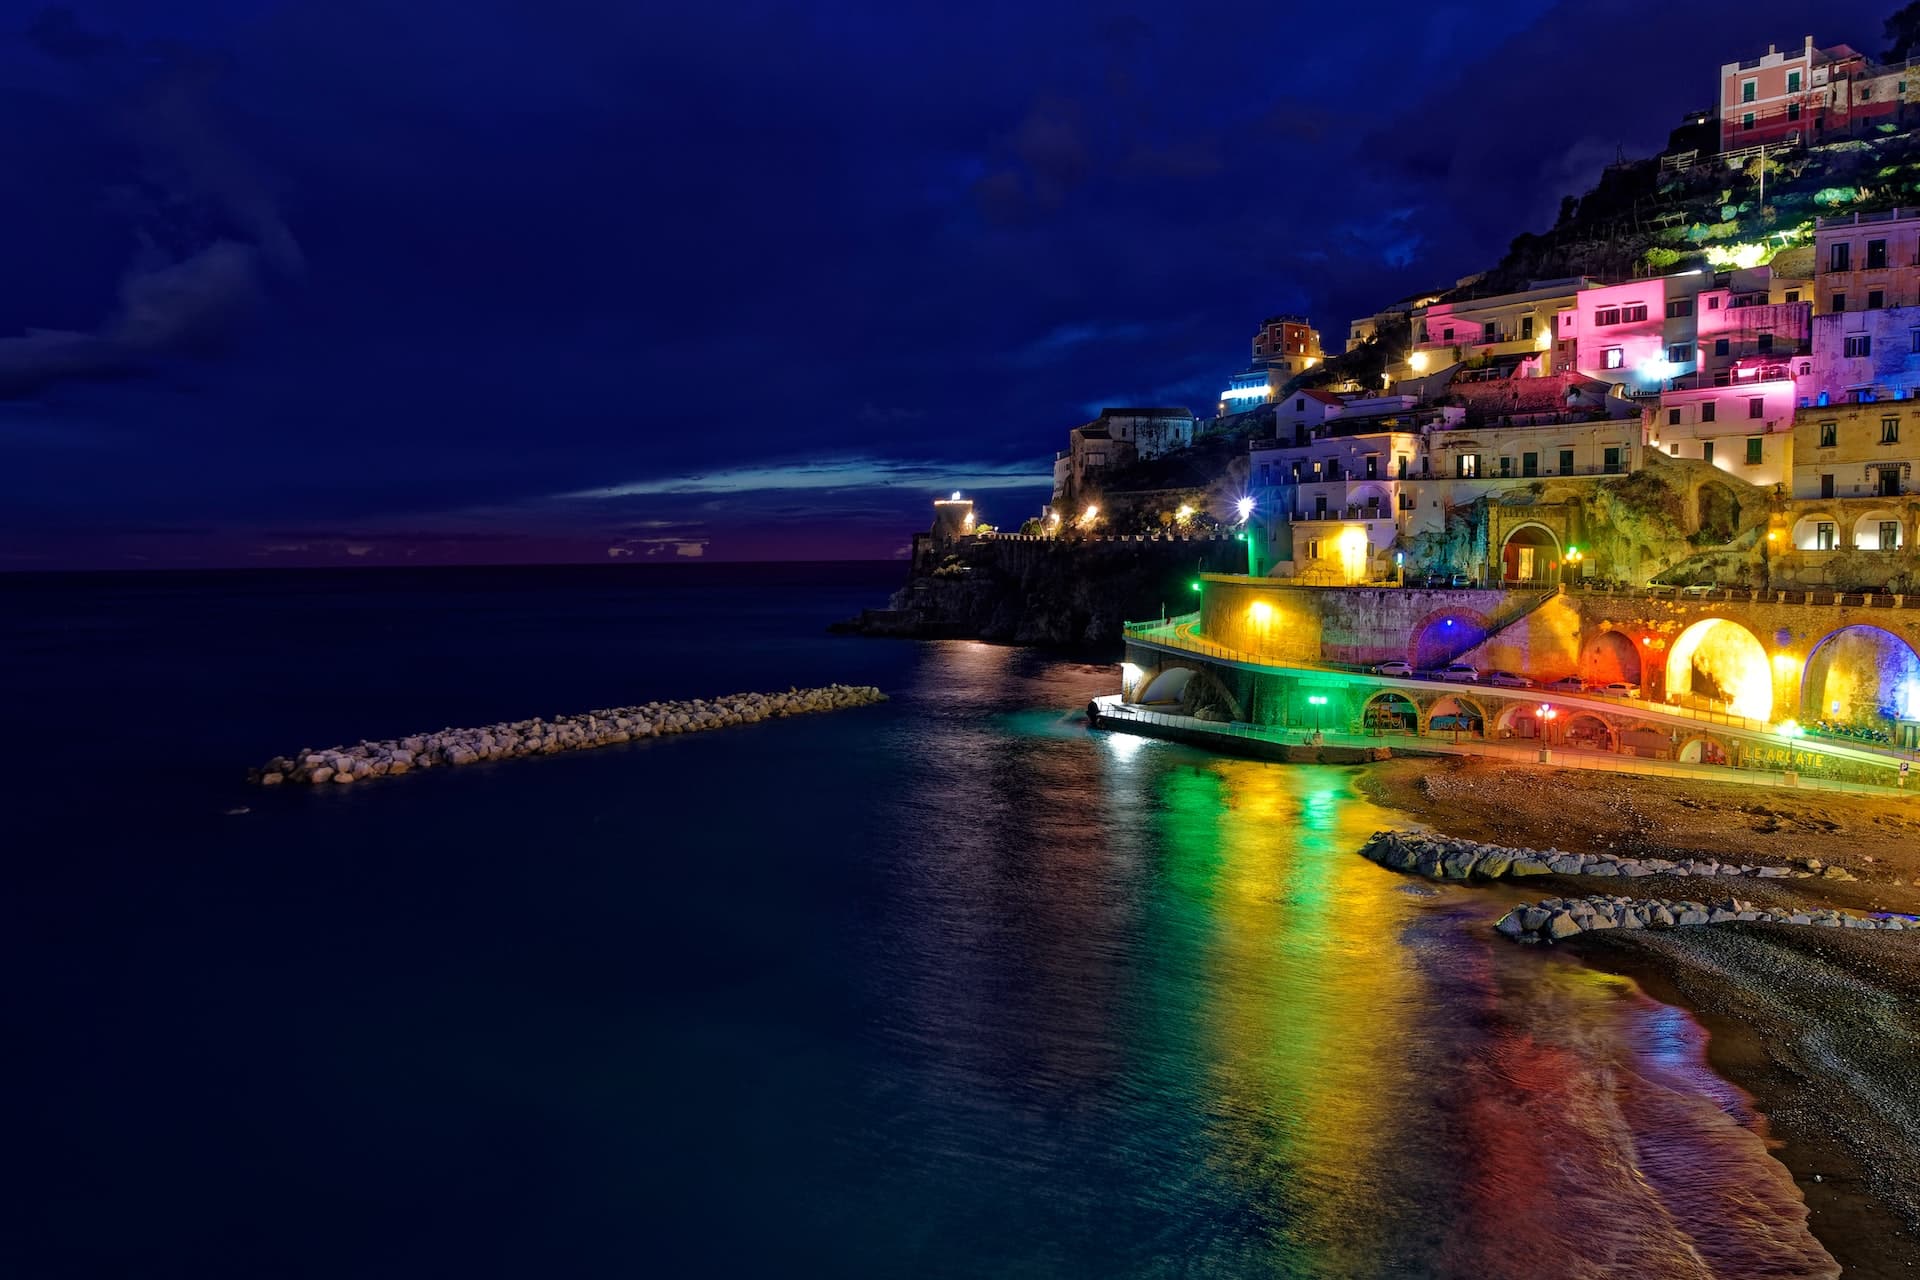 The Families' Beginner's Travel Guide in 2022 atrani beach at night